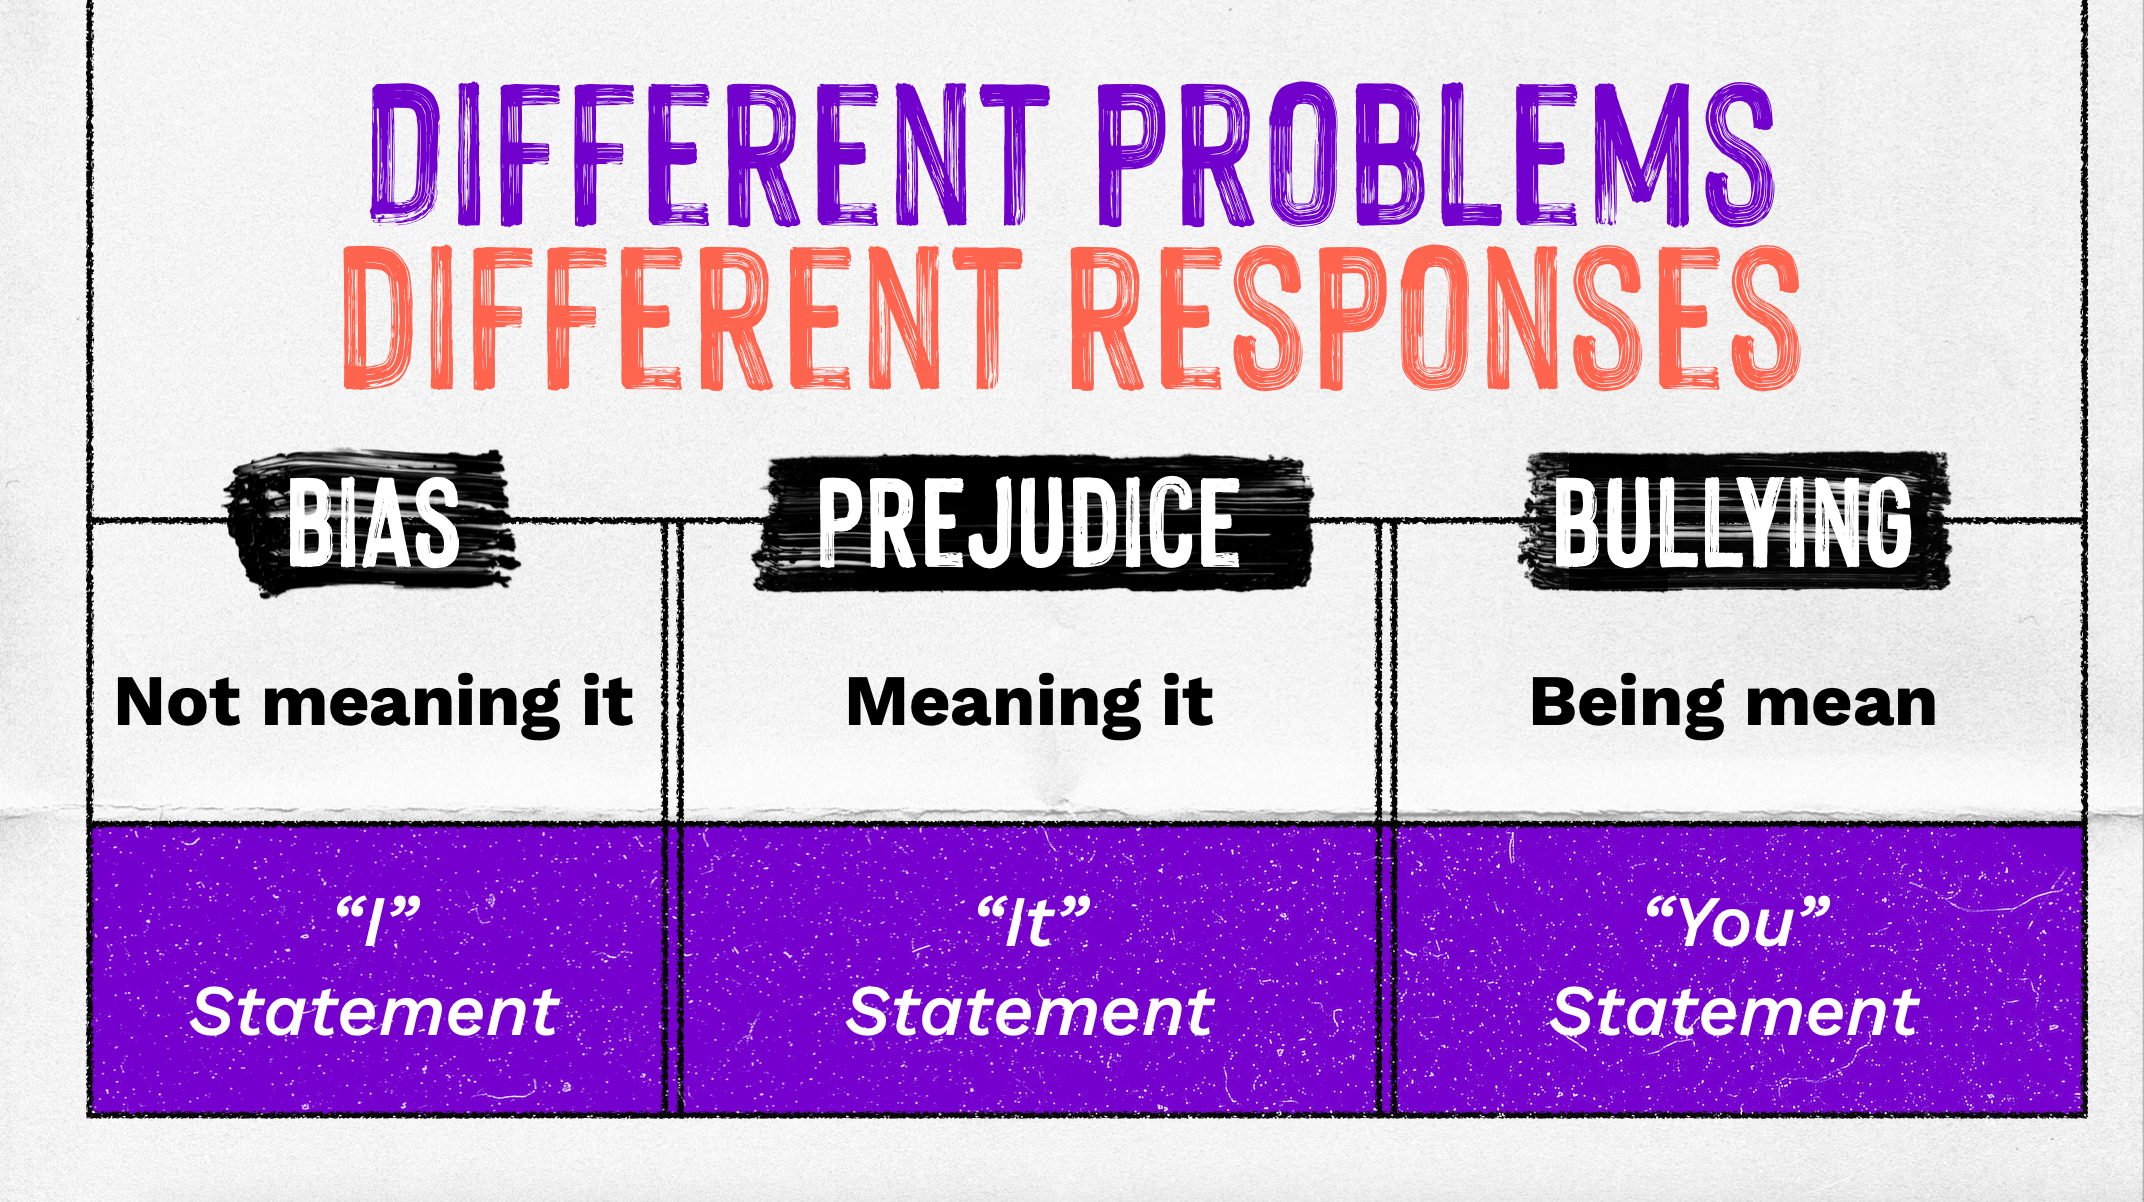 Bias, prejudice and bullying definitions and responses from Kim Scott. 